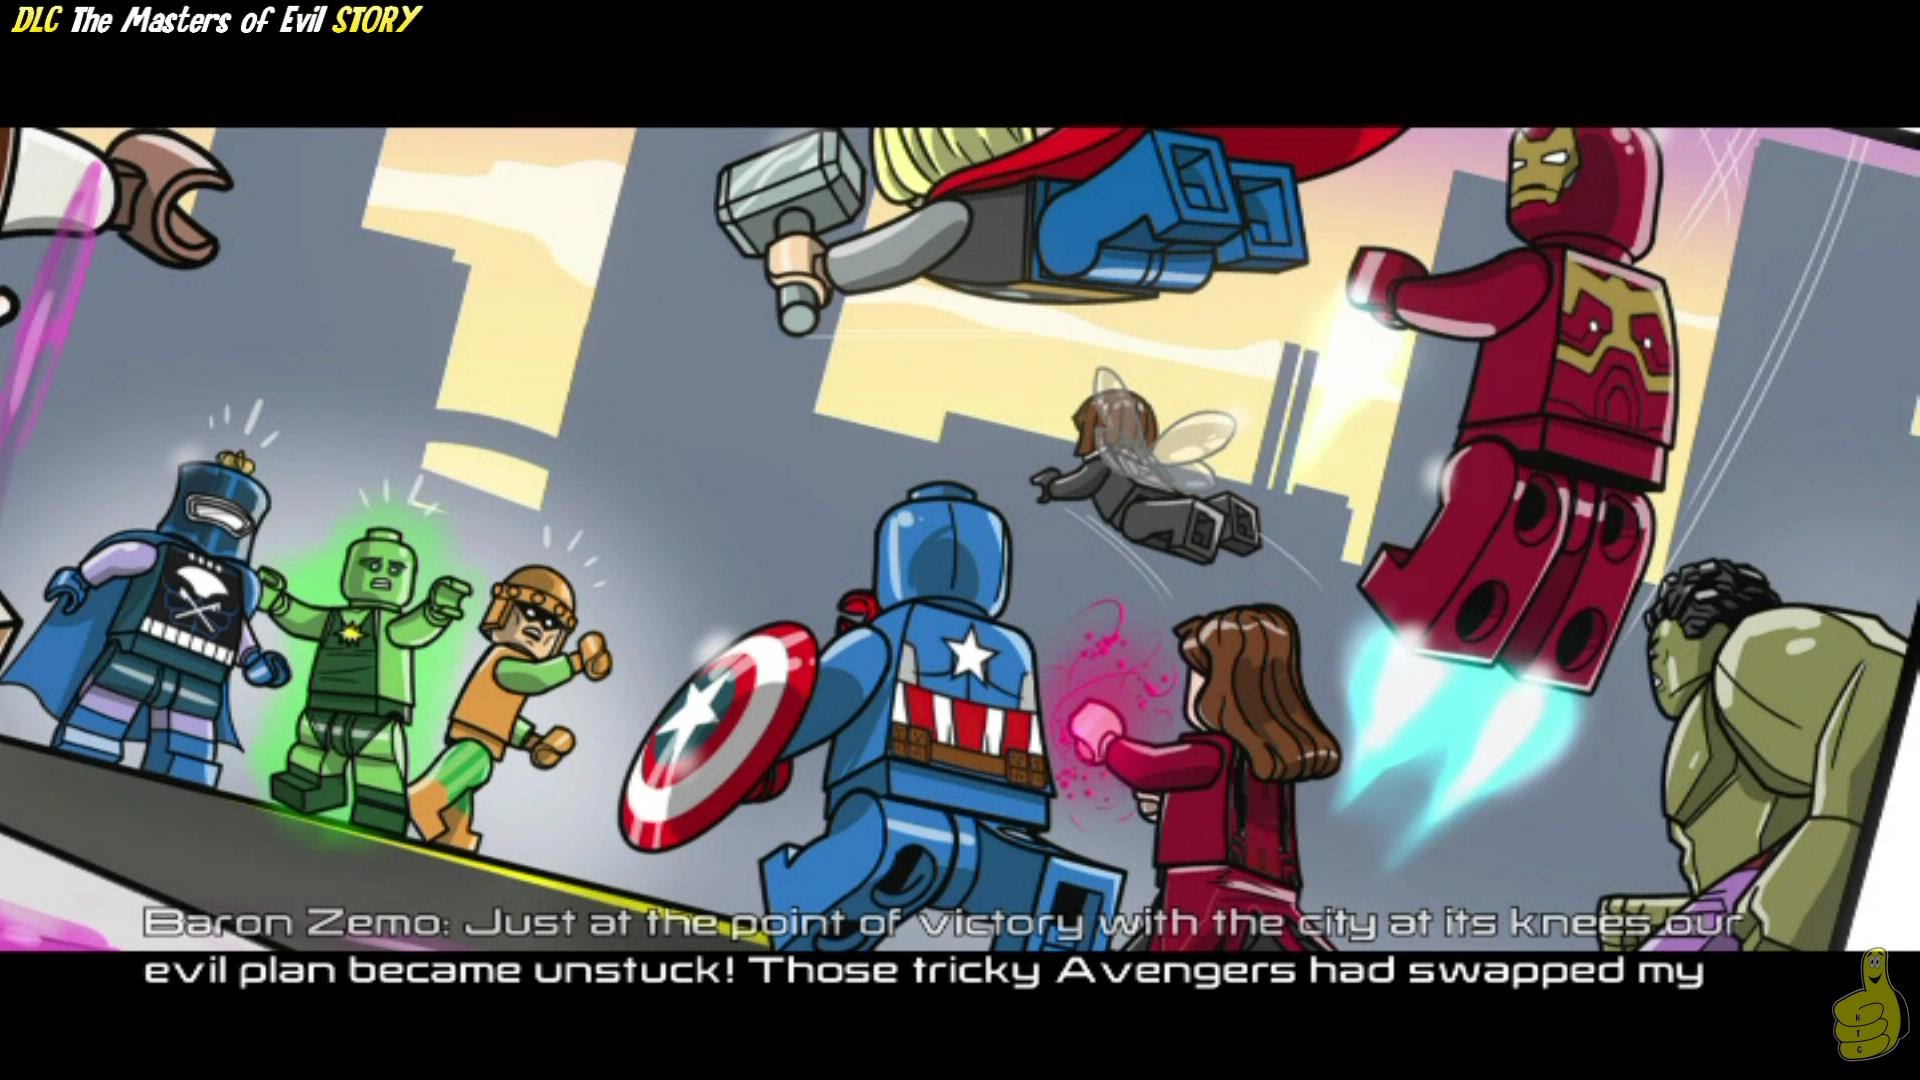 Lego Marvel Avengers: DLC Masters of Evil STORY / A Sticky Situation Trophy/Achievement – HTG